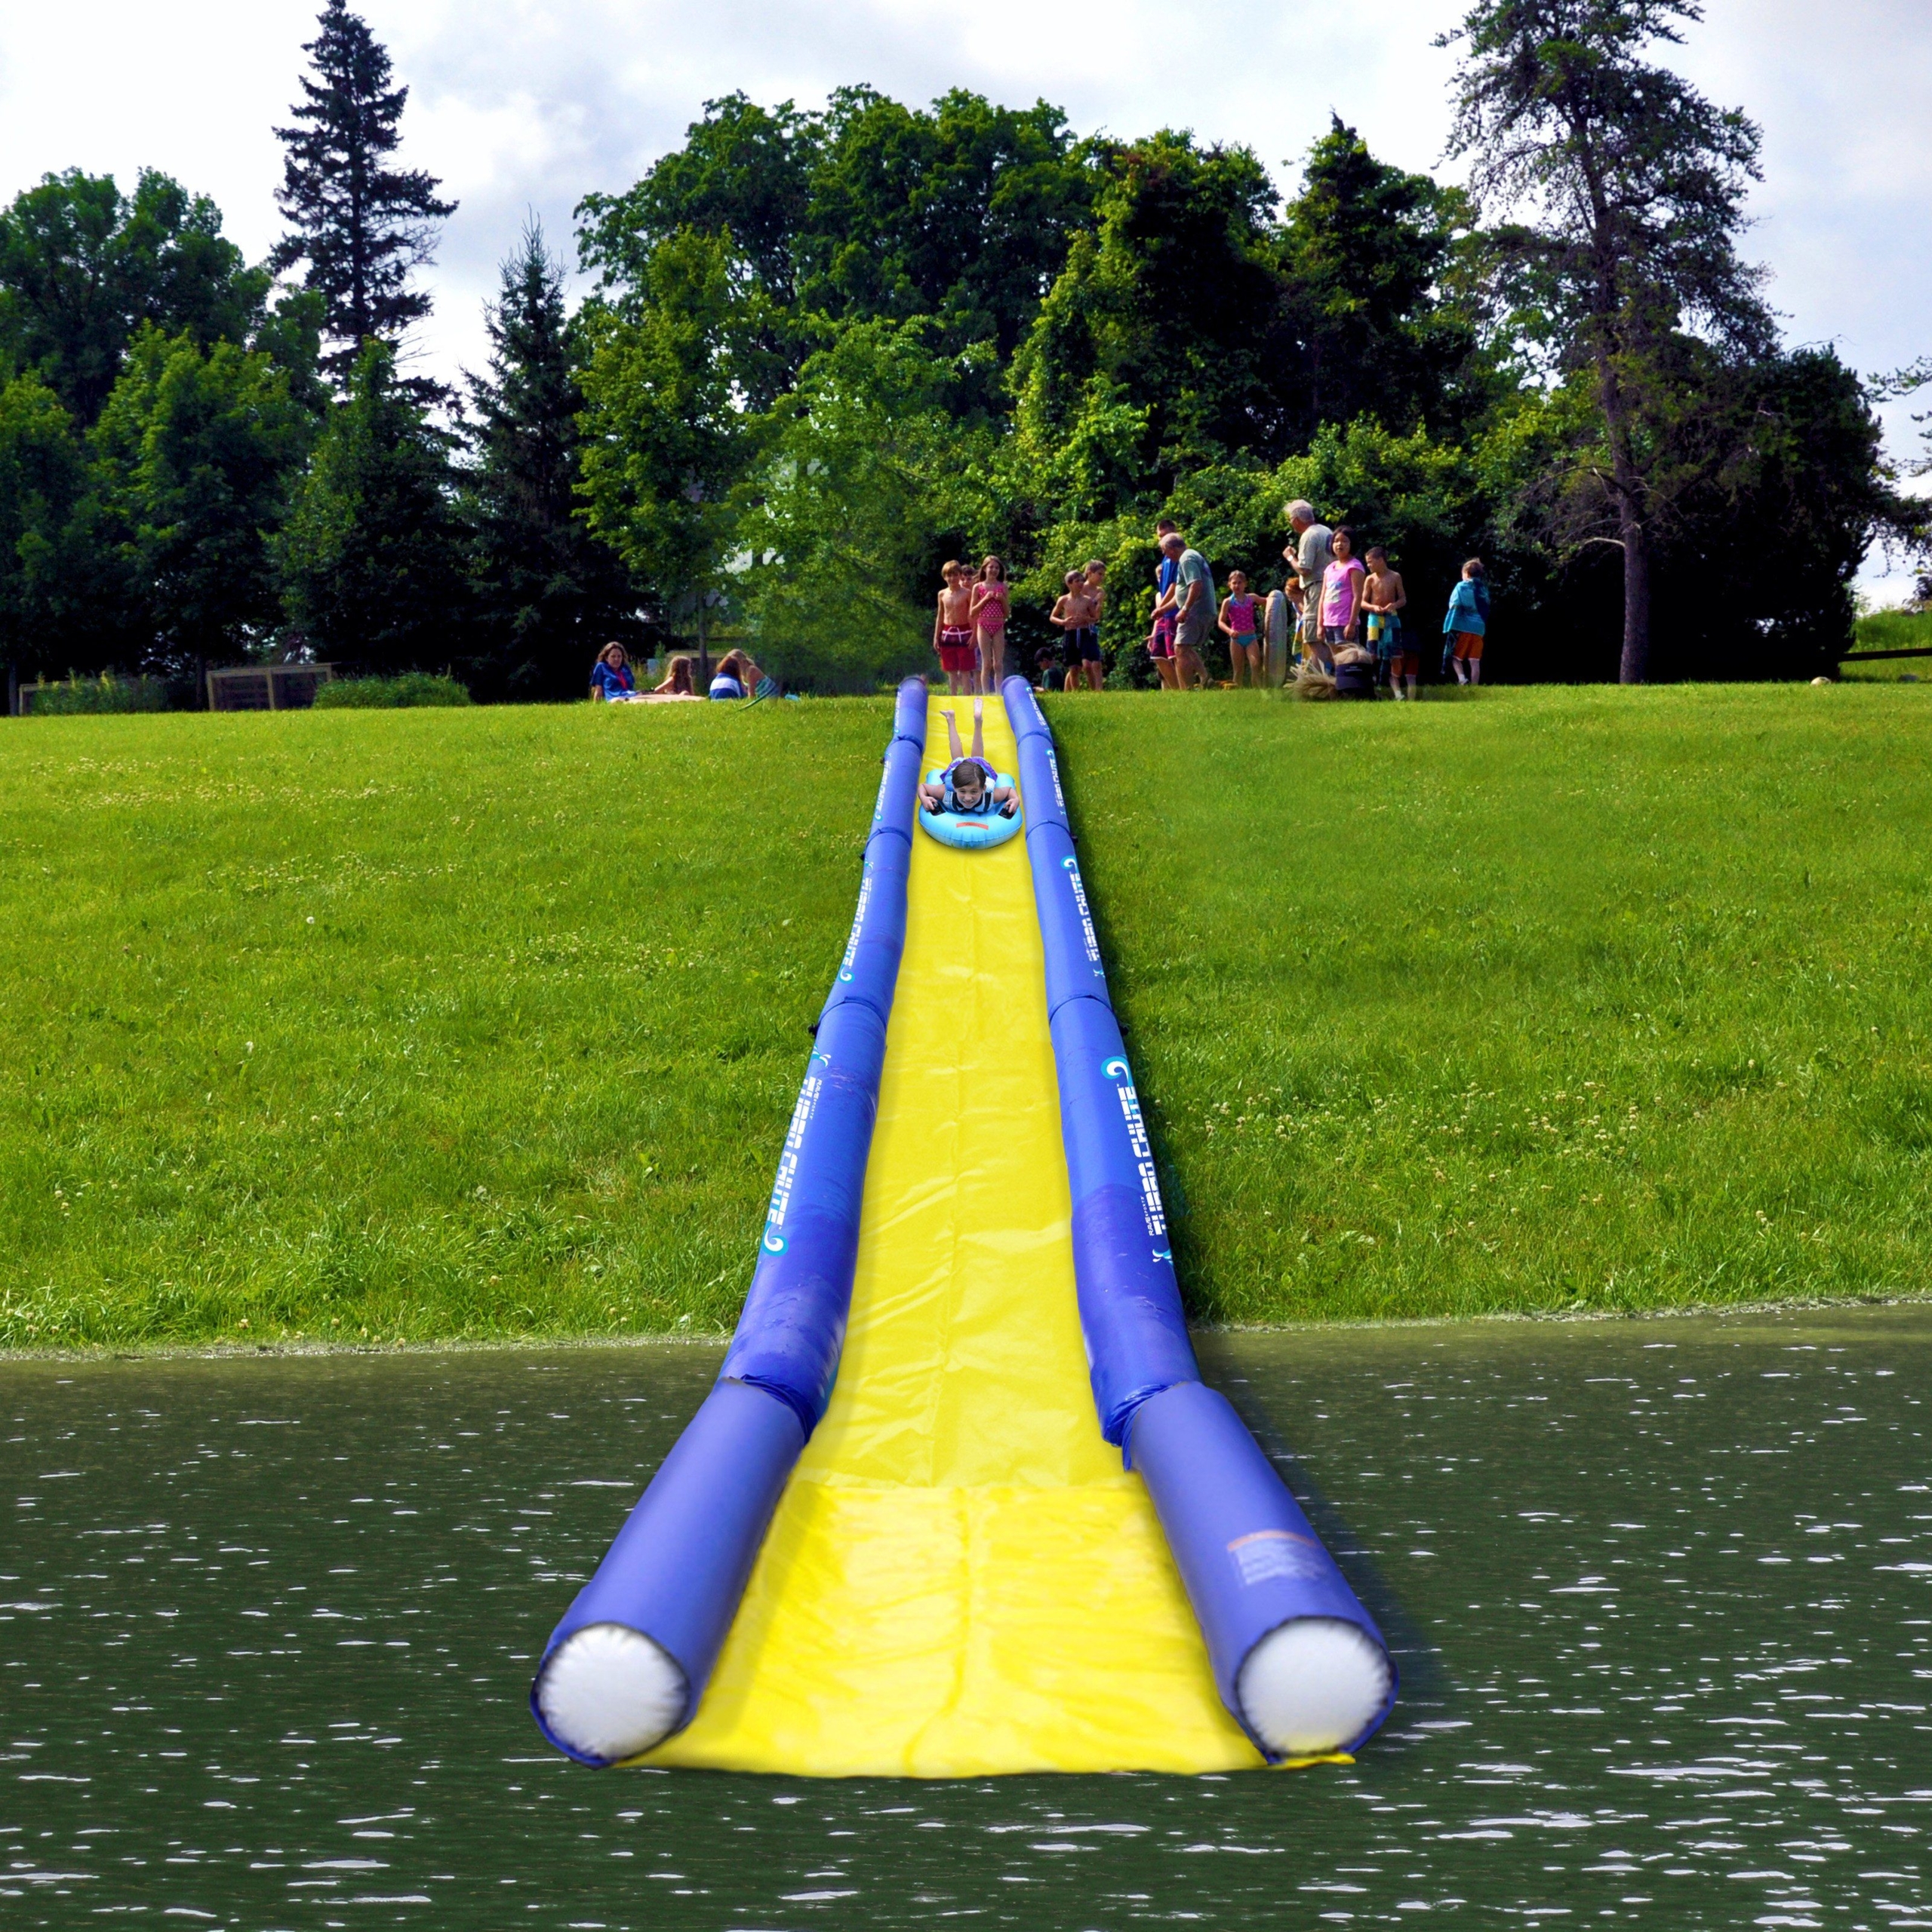 Rave sports turbo chute waterslide lakeshore package bounce houses at